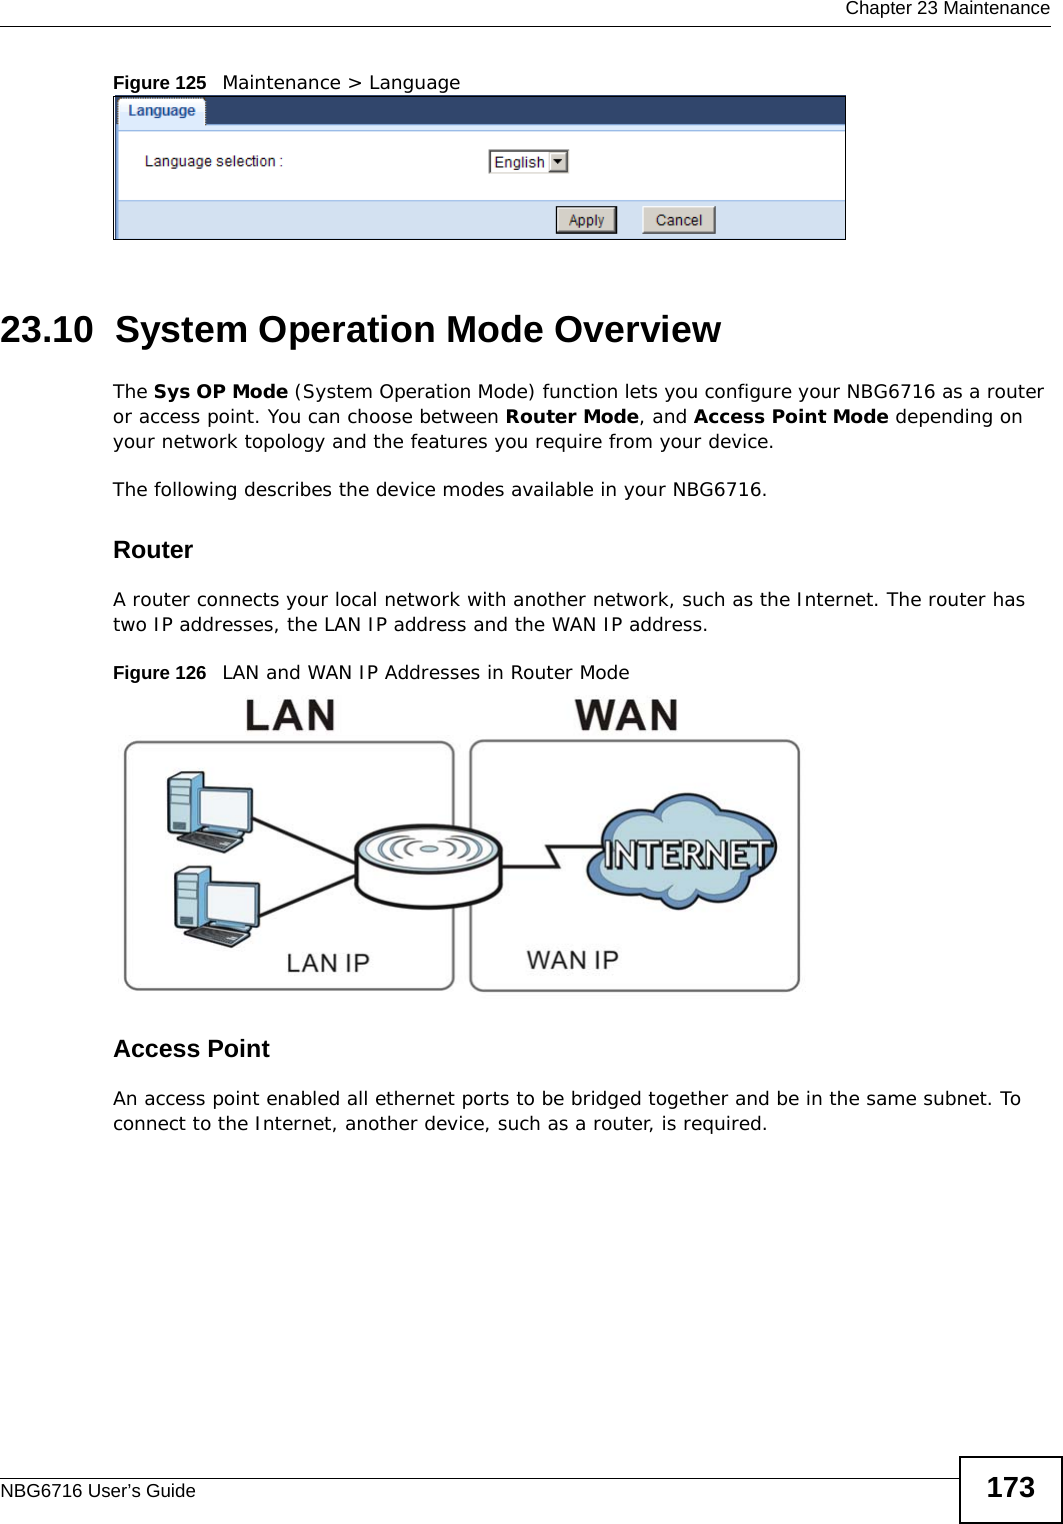  Chapter 23 MaintenanceNBG6716 User’s Guide 173Figure 125   Maintenance &gt; Language 23.10  System Operation Mode OverviewThe Sys OP Mode (System Operation Mode) function lets you configure your NBG6716 as a router or access point. You can choose between Router Mode, and Access Point Mode depending on your network topology and the features you require from your device. The following describes the device modes available in your NBG6716.RouterA router connects your local network with another network, such as the Internet. The router has two IP addresses, the LAN IP address and the WAN IP address.Figure 126   LAN and WAN IP Addresses in Router ModeAccess PointAn access point enabled all ethernet ports to be bridged together and be in the same subnet. To connect to the Internet, another device, such as a router, is required.